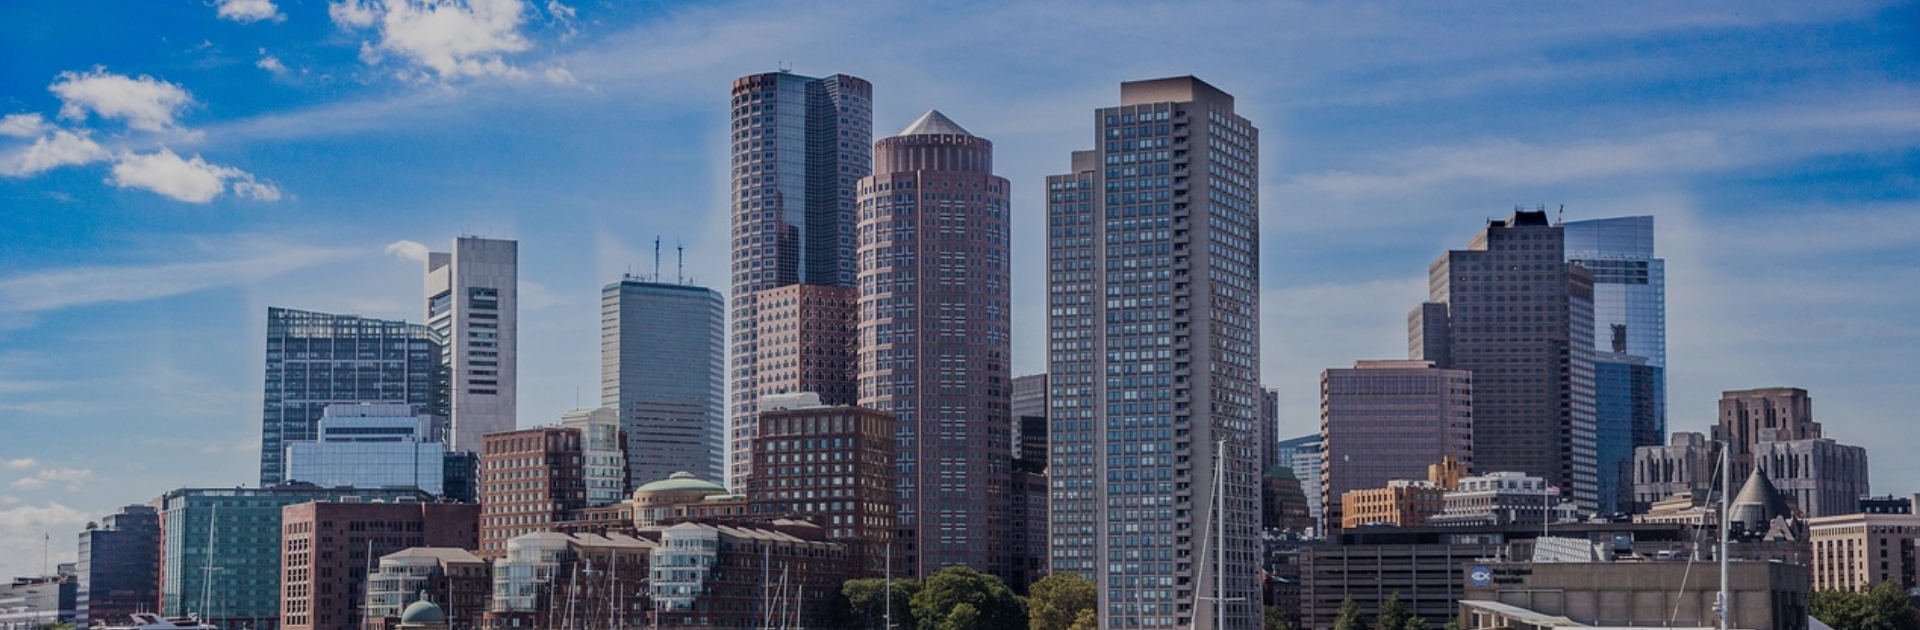 An event participation announcement by SHL Medical titled “SHL Medical returns to Boston for 2023 PODD” featuring the Boston skylight